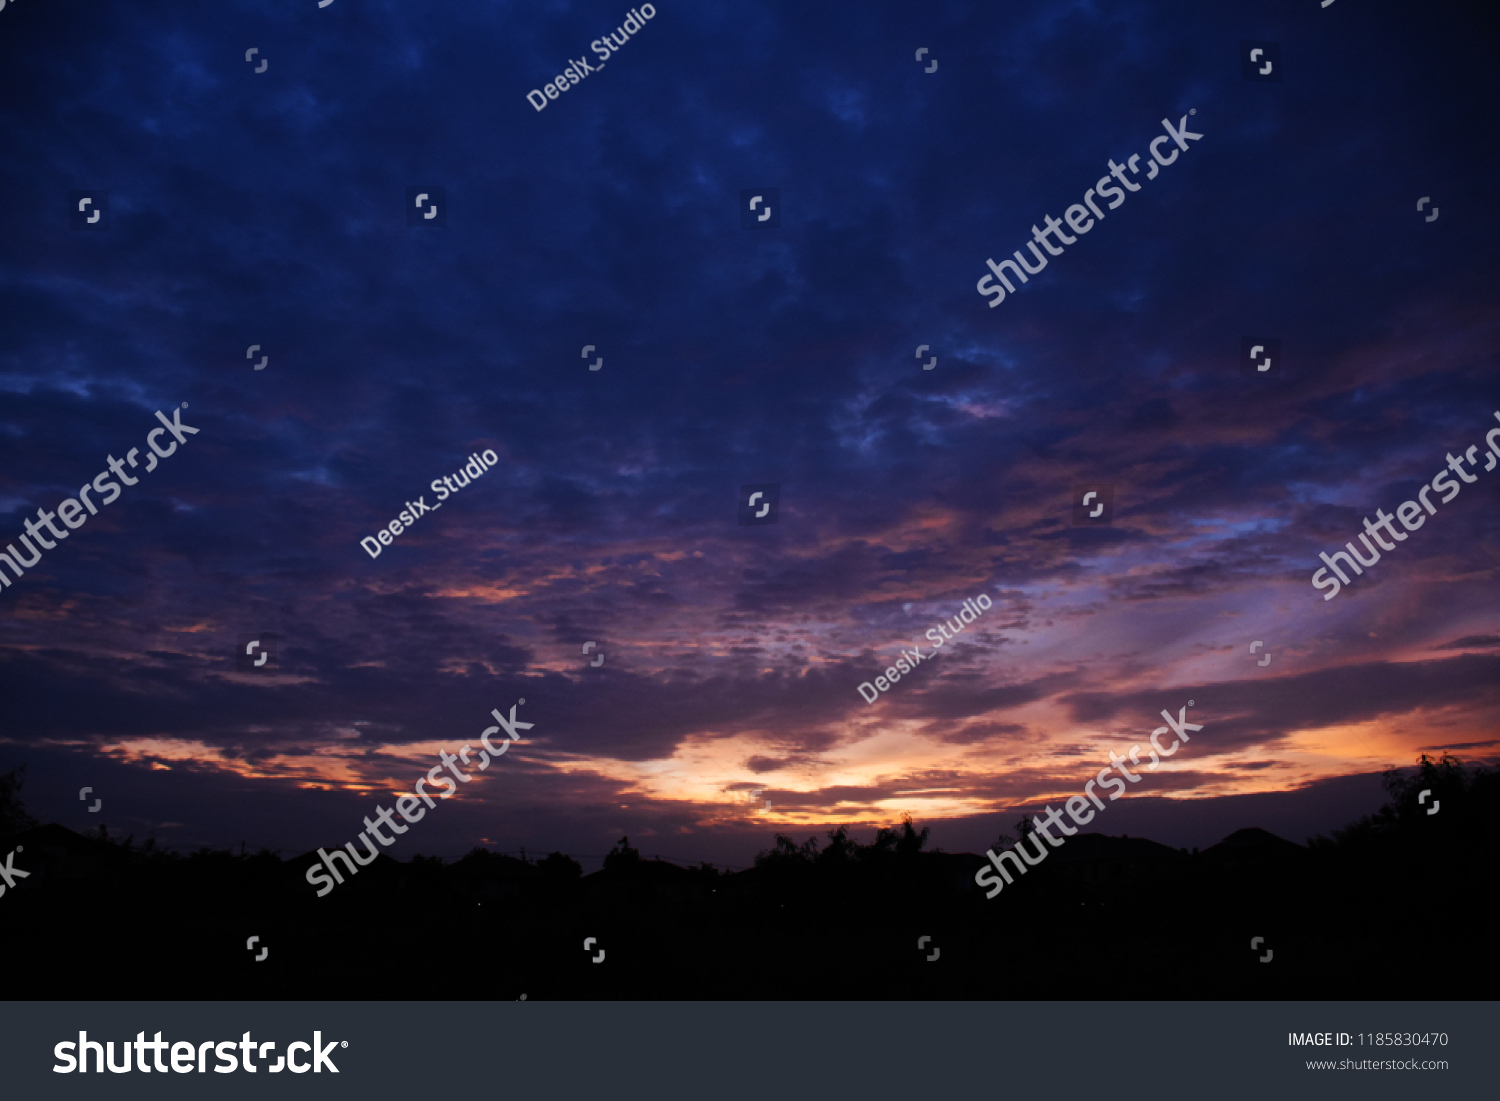 Colorful sky in twilight time background, Twilight sky with cloud #1185830470